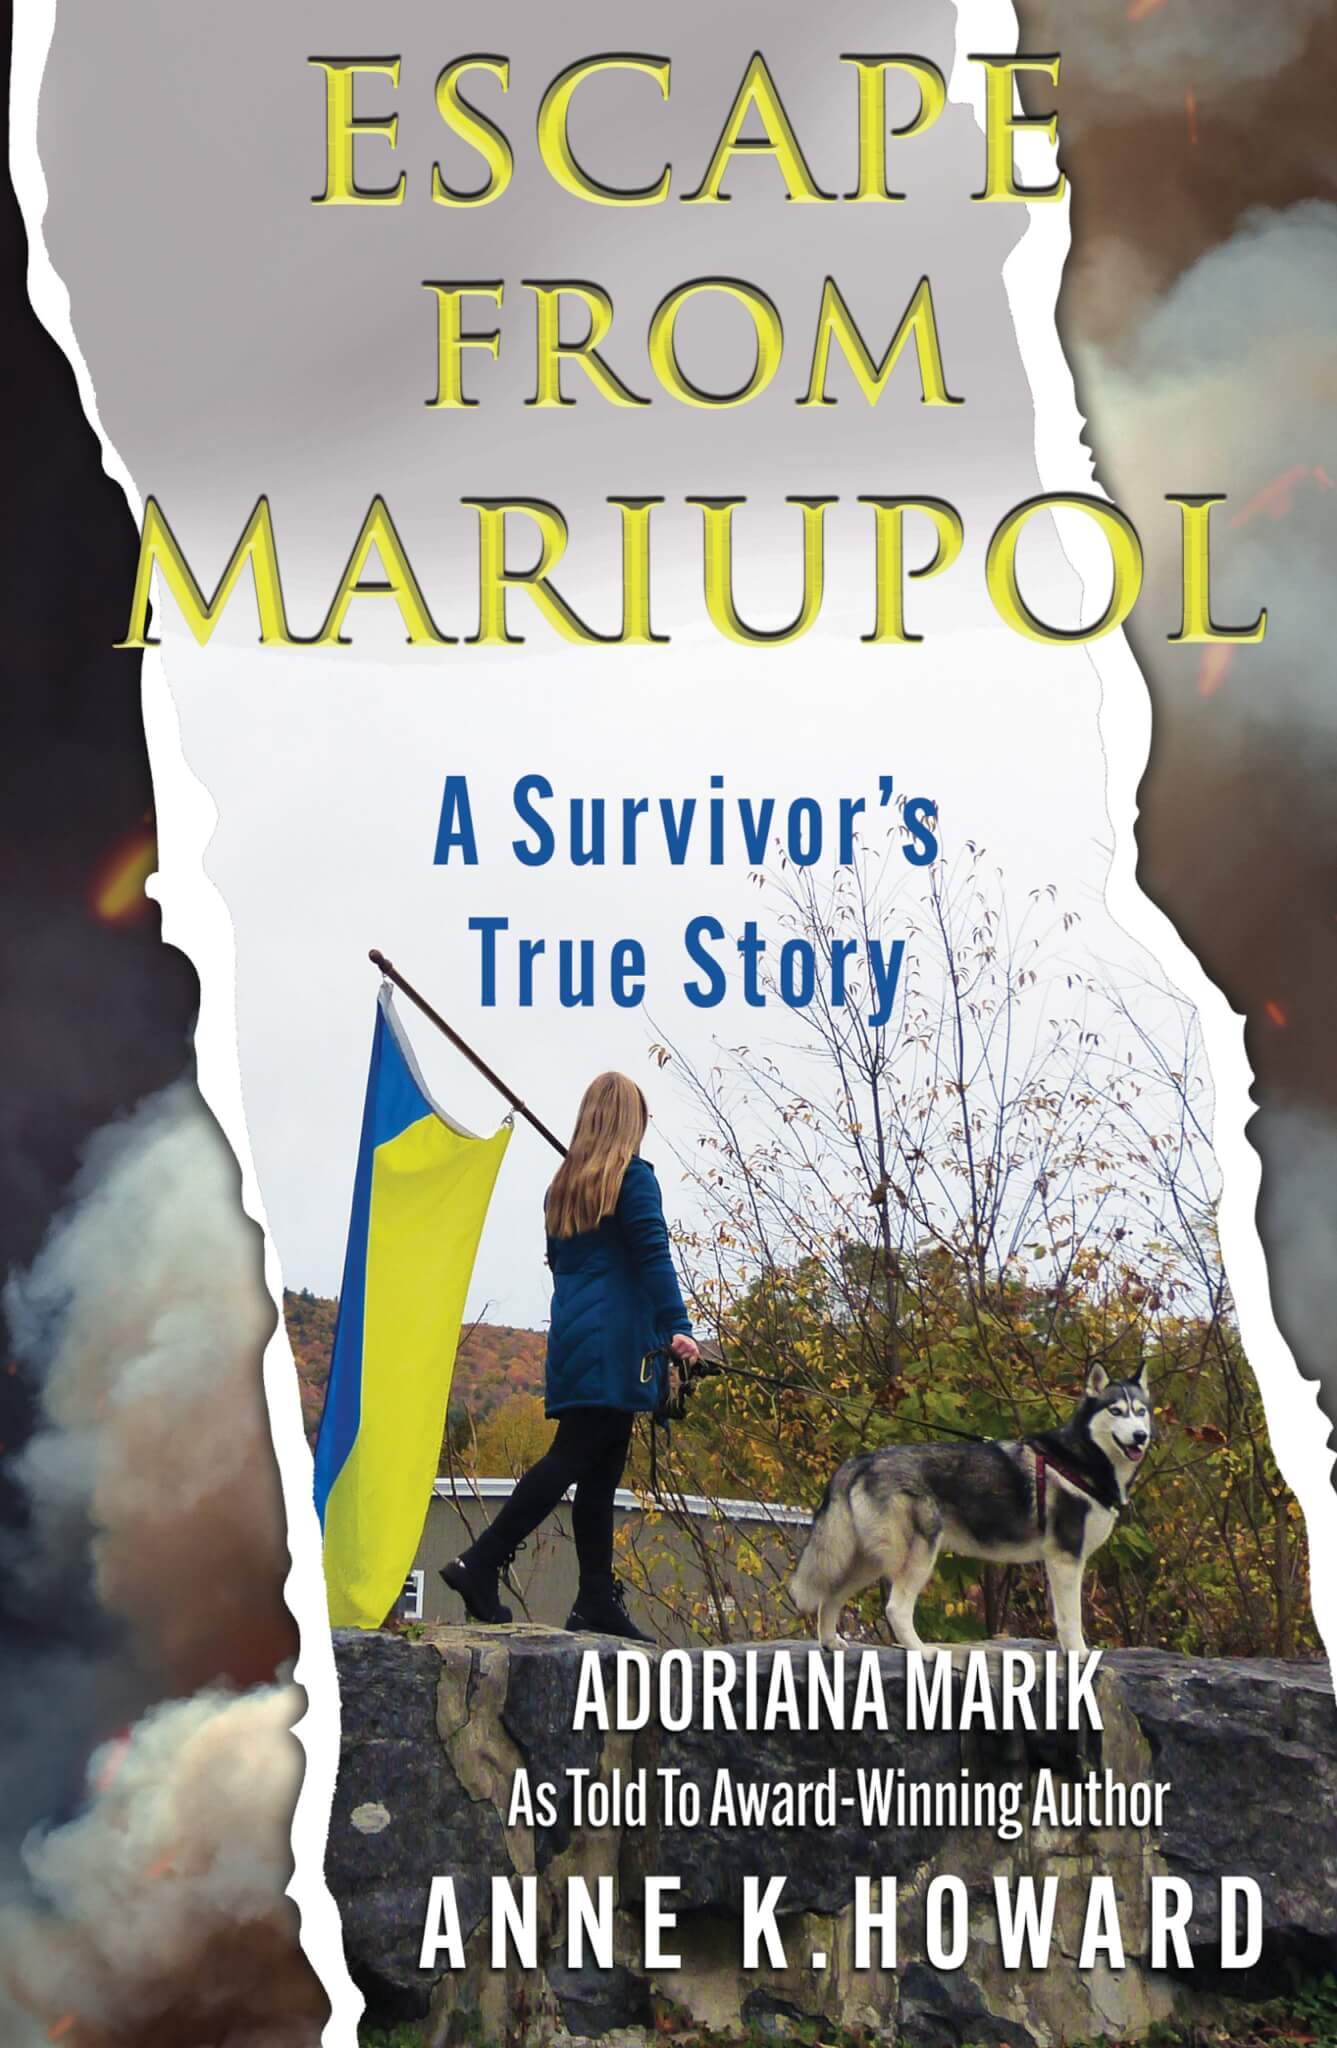 Escape from Mariupol: A Survivor's True Story Audio Books Available